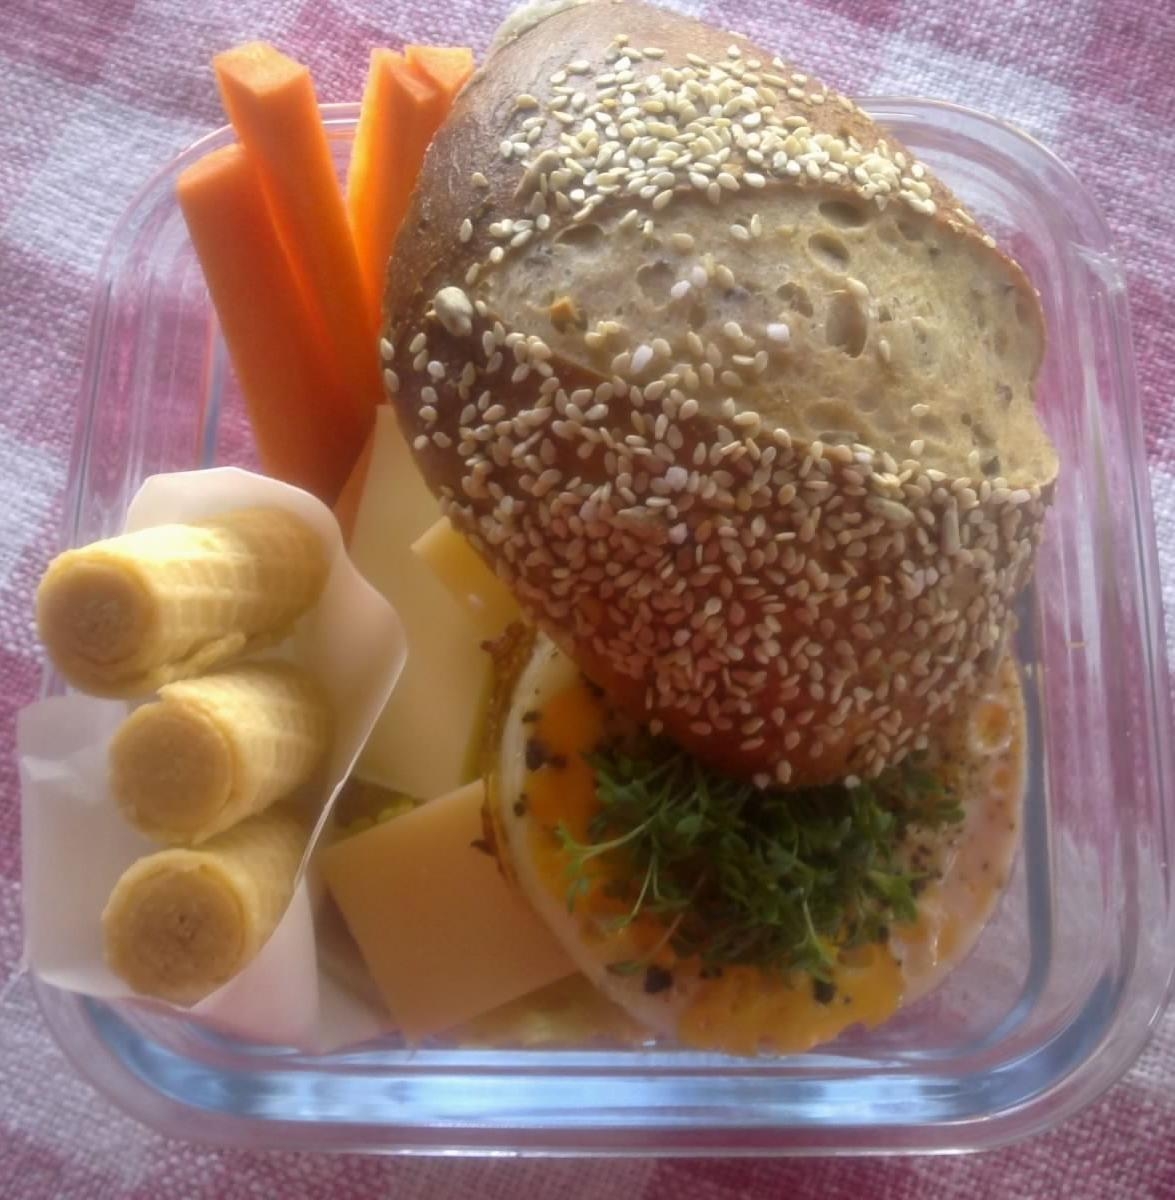 #foodchallenge
#lunchtime
Lunchbox oder einfach "Butterbrot"